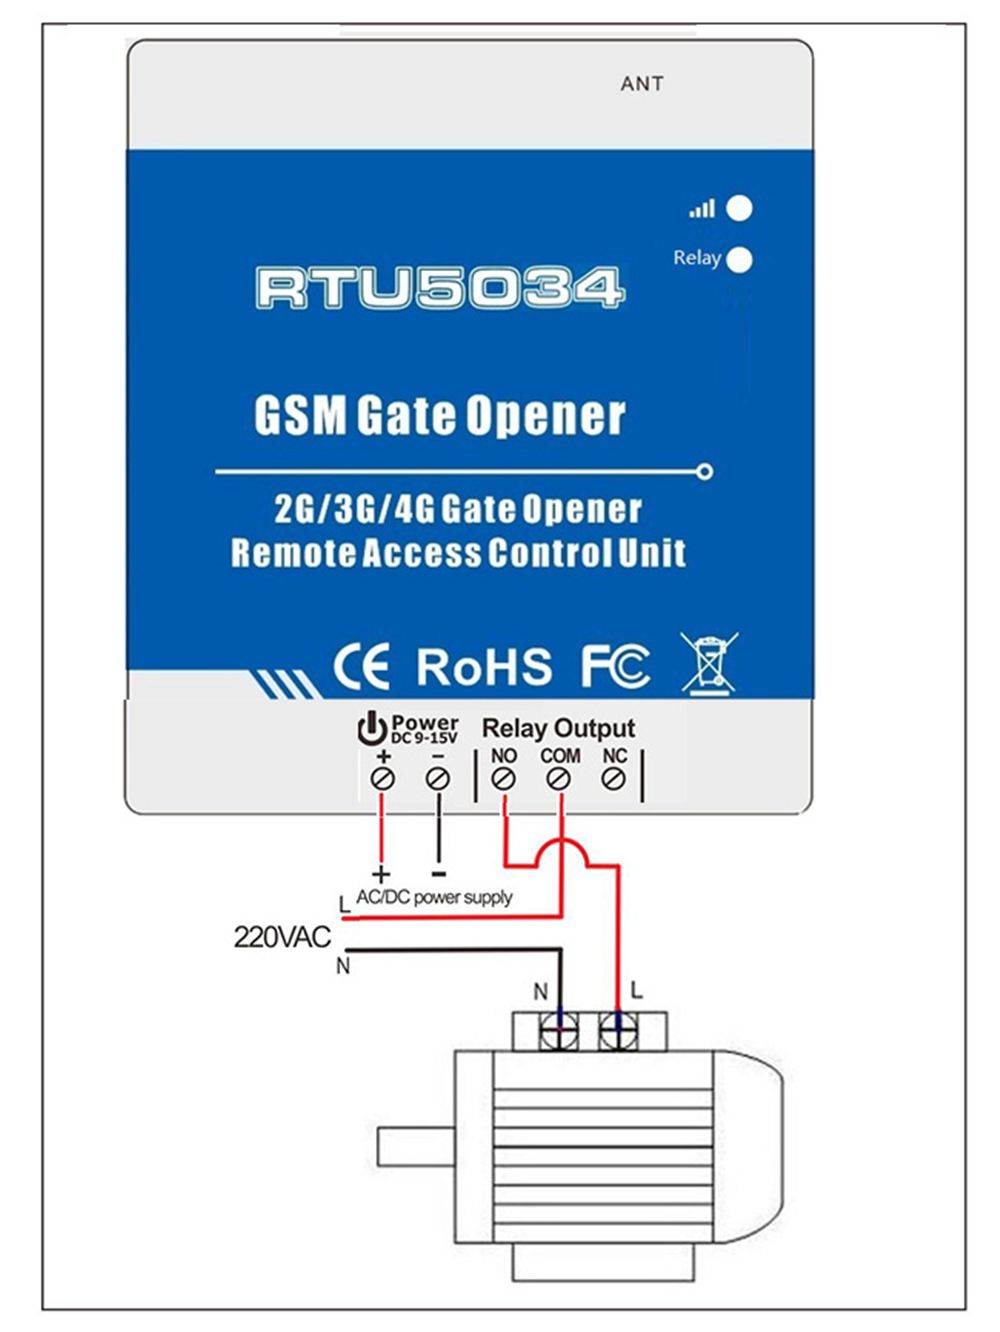 RTU5034-GSM-Gate-Opener-Access-Relay-Switch-Remote-Control-by-Free-Call-Home-Alarm-System-Security-f-1566638